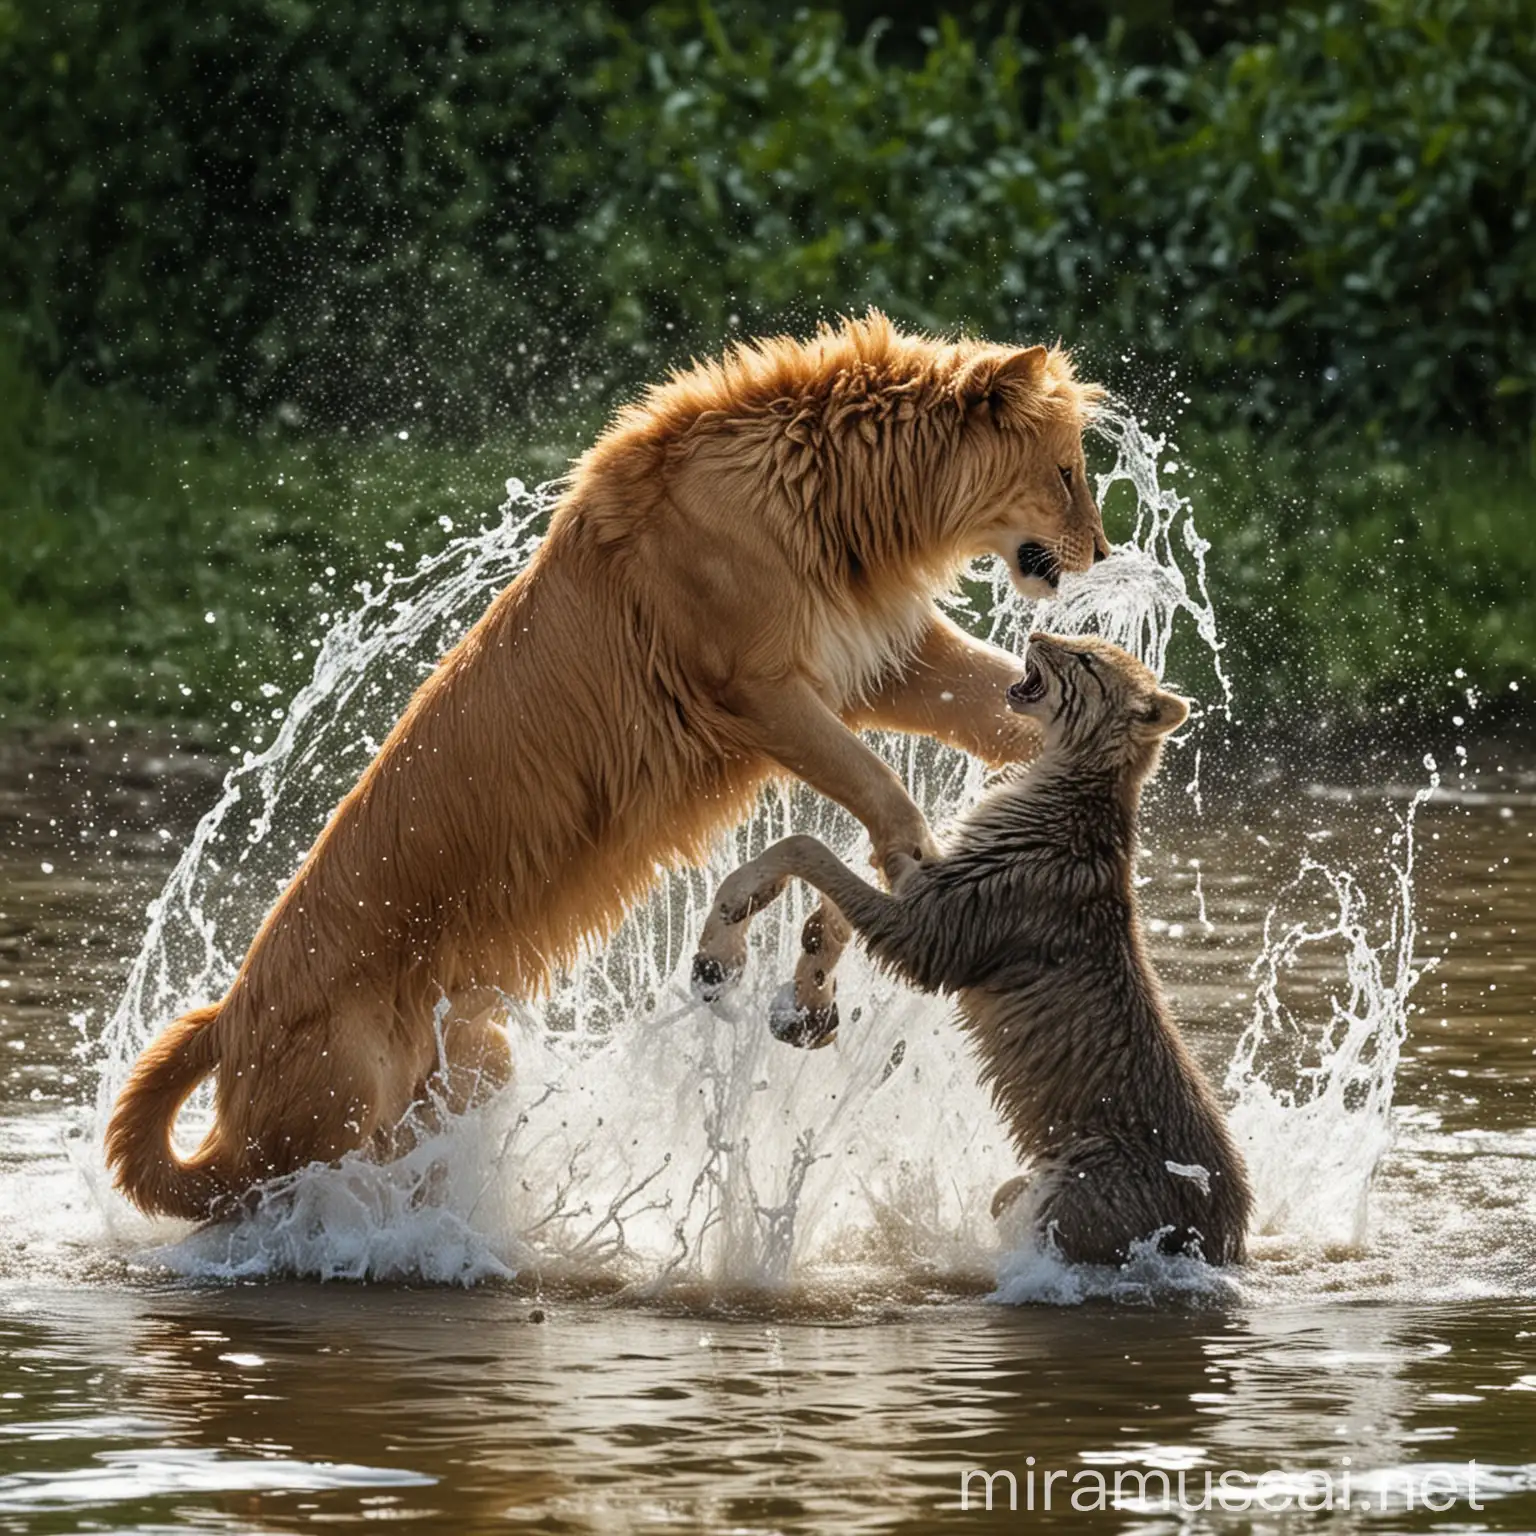 Animals playing in water